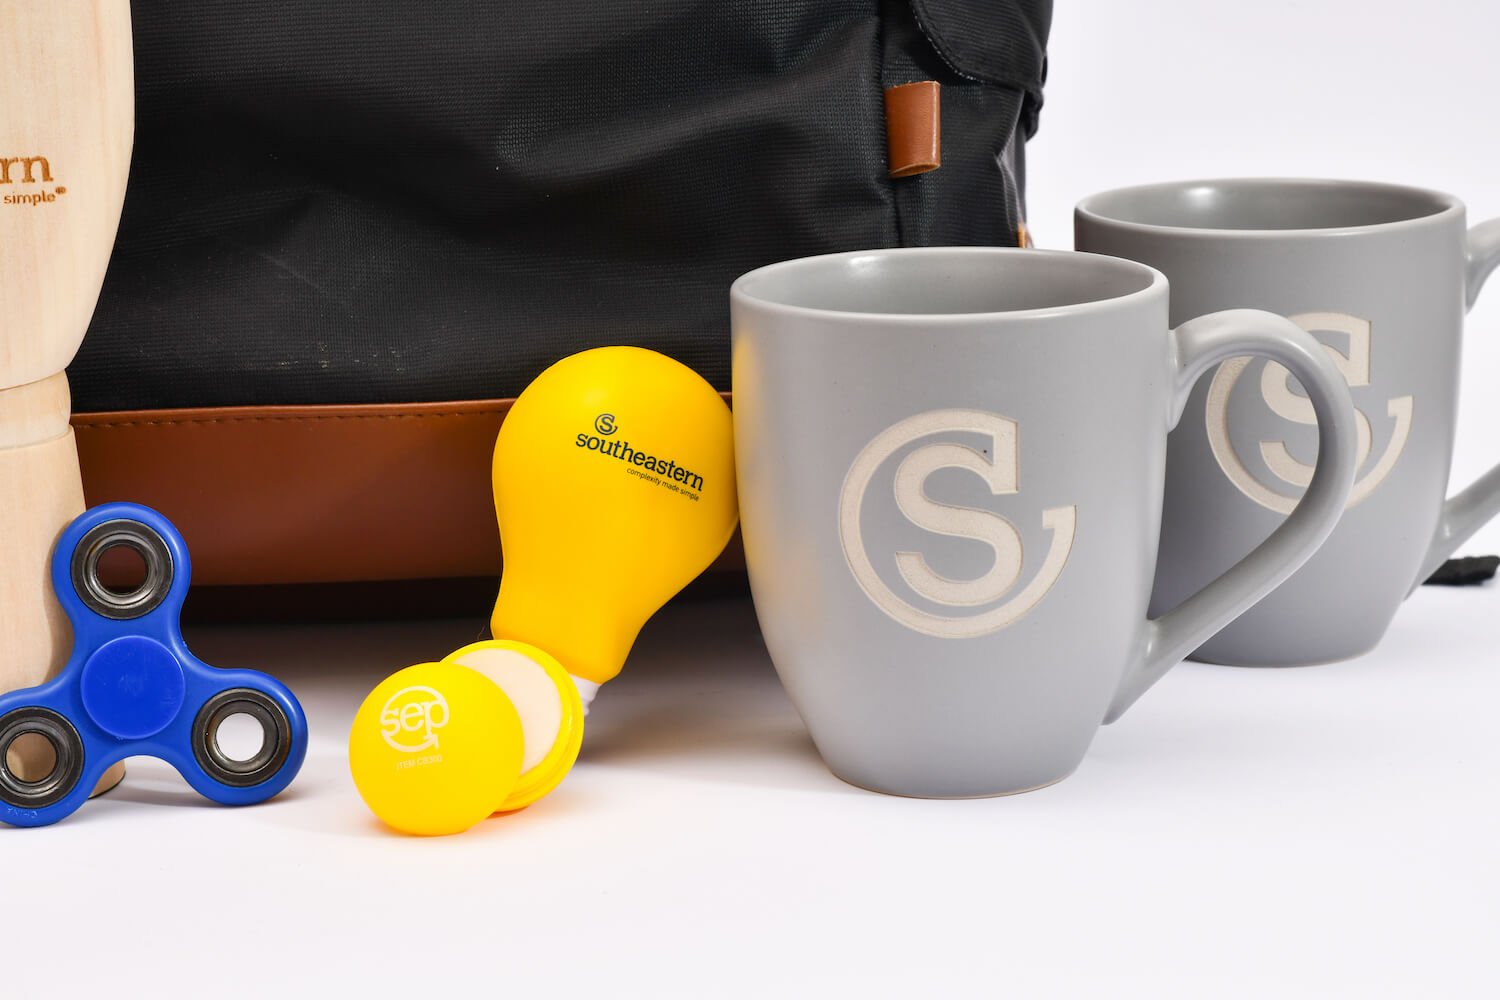 Southeastern branded swag, including a fidget spinner, lip balm, and coffee mugs